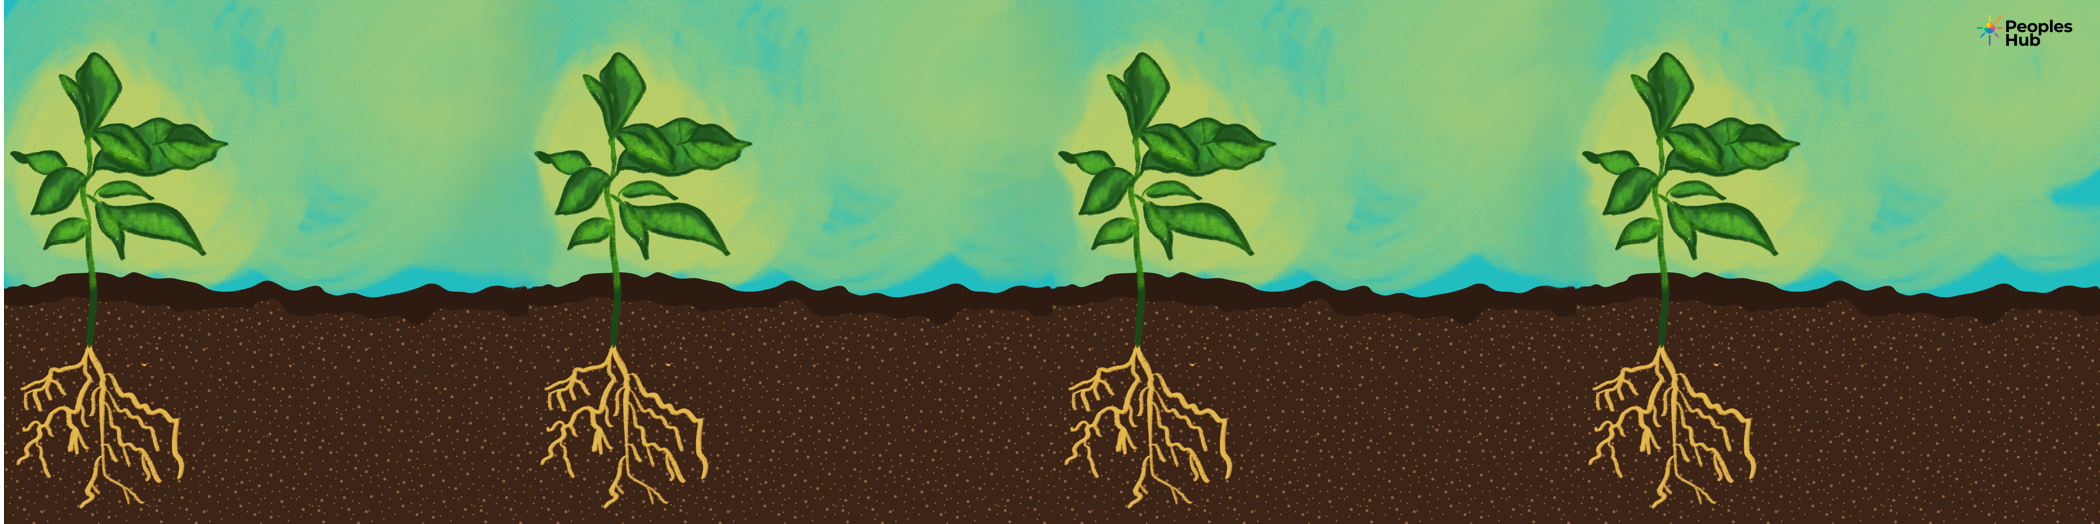 banner image of four seedlings emerging from the soil, view is of underground and the sky.